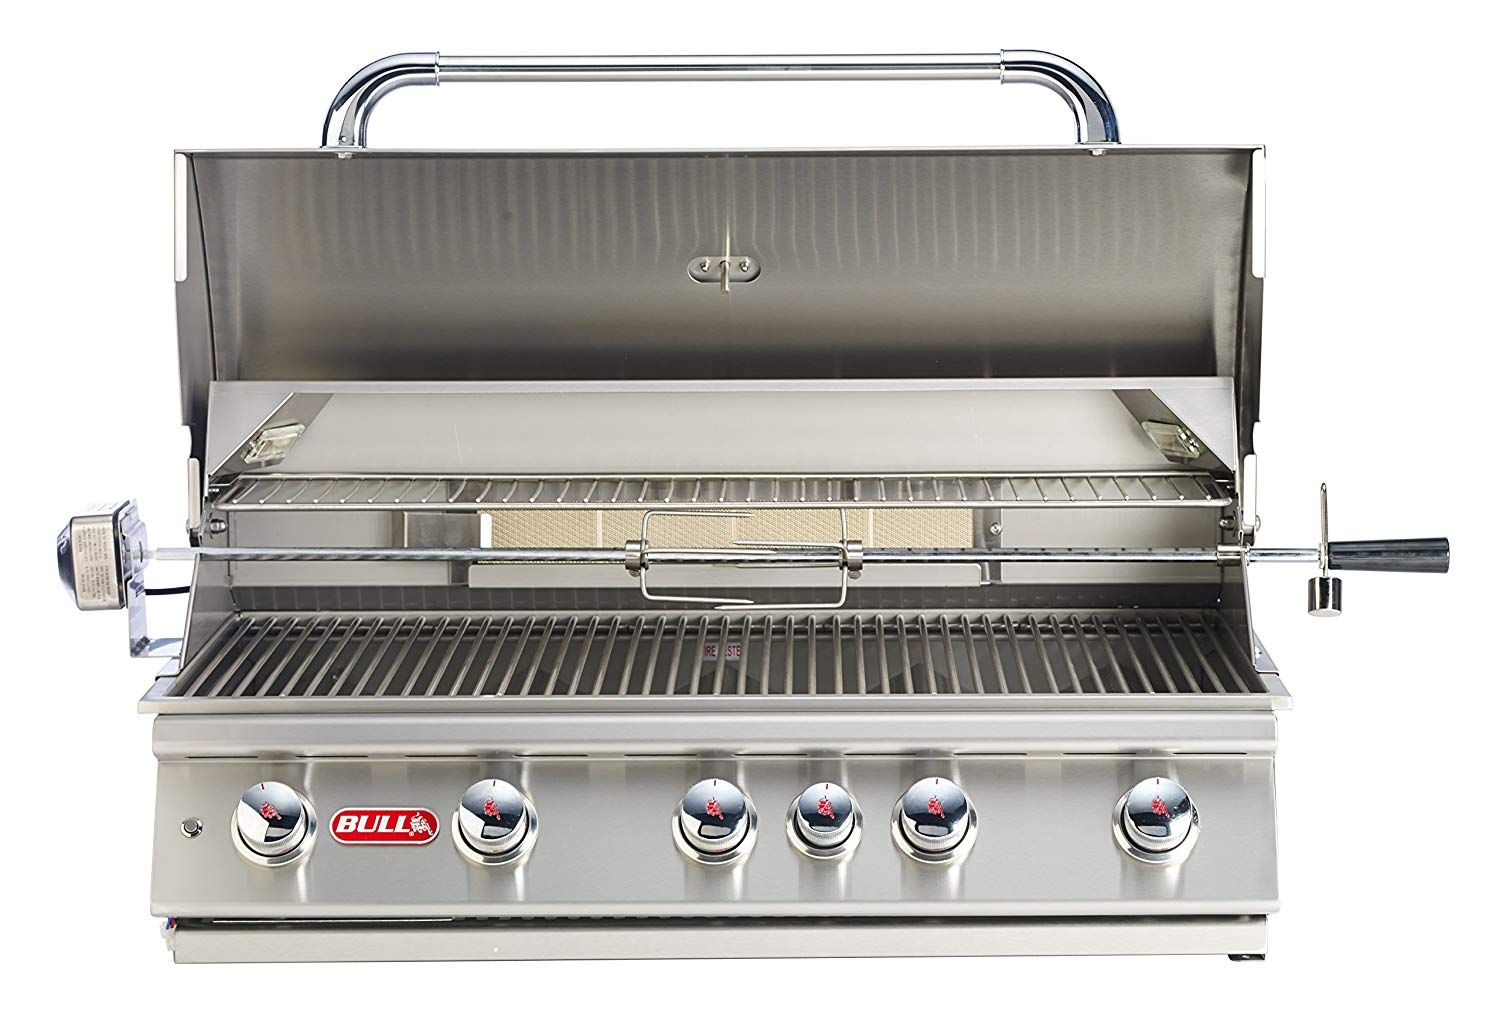 Small Gas BBQ For Sale - Buy Electric, Charcoal and Propane Grills At Best Prices